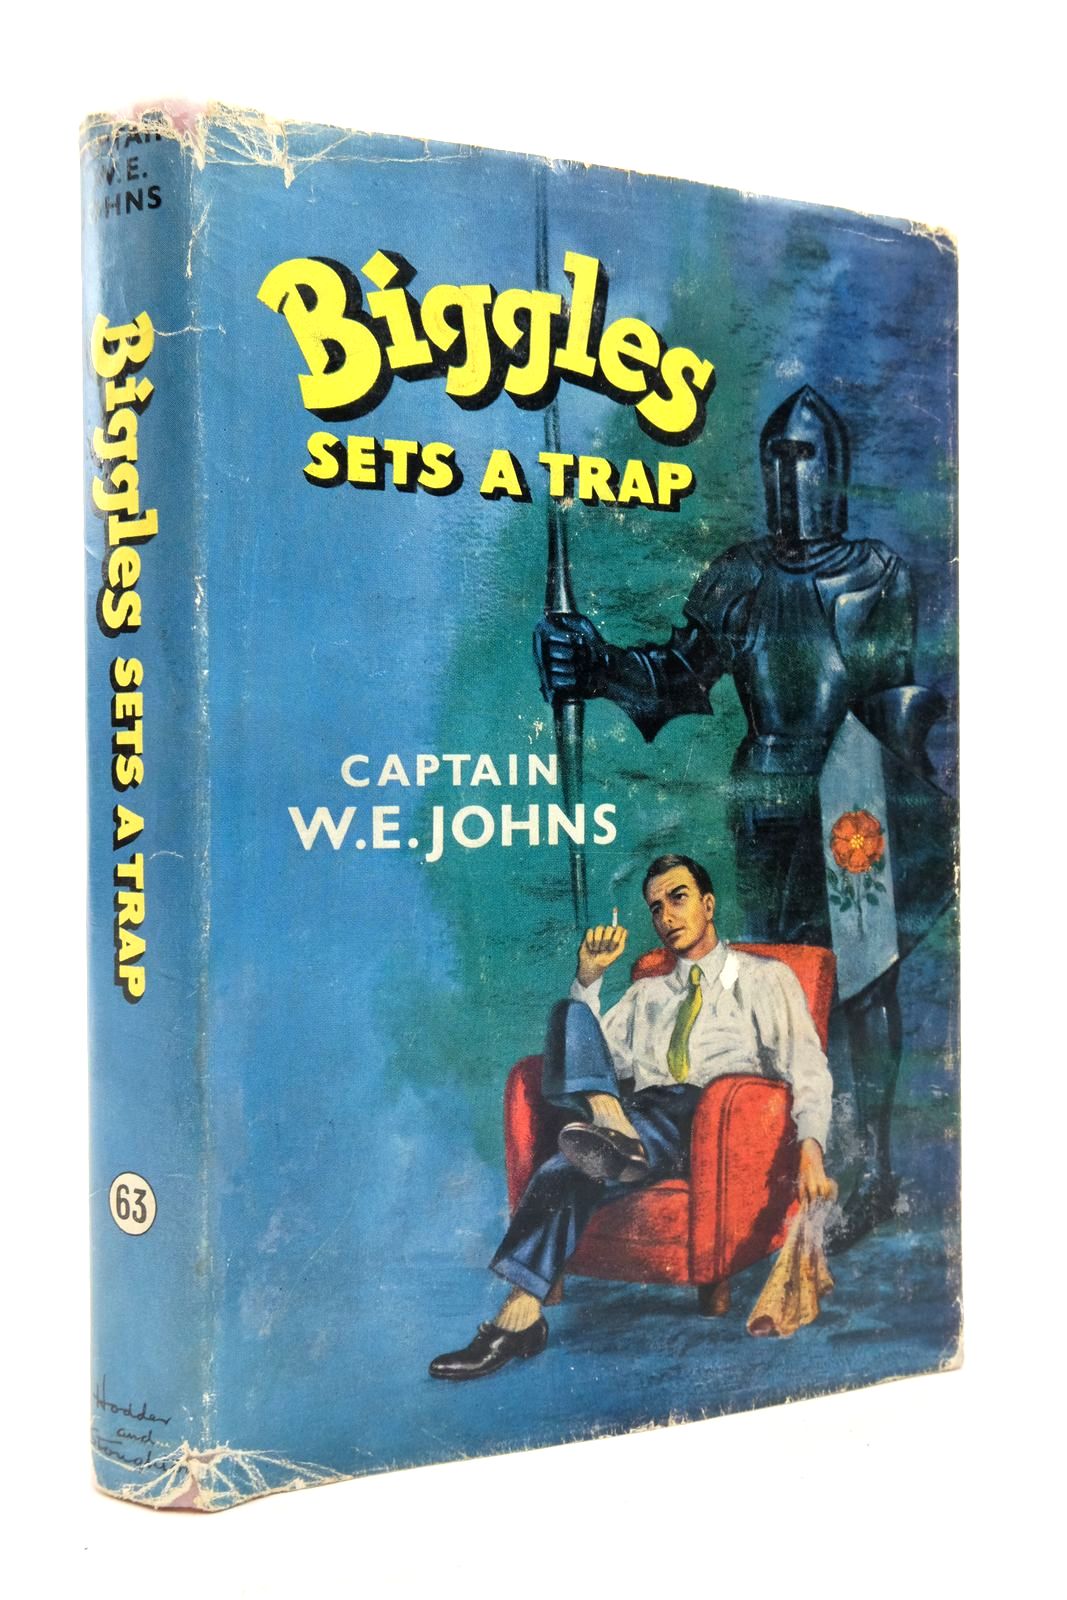 Photo of BIGGLES SETS A TRAP written by Johns, W.E. illustrated by Stead,  published by Hodder &amp; Stoughton (STOCK CODE: 2137441)  for sale by Stella & Rose's Books